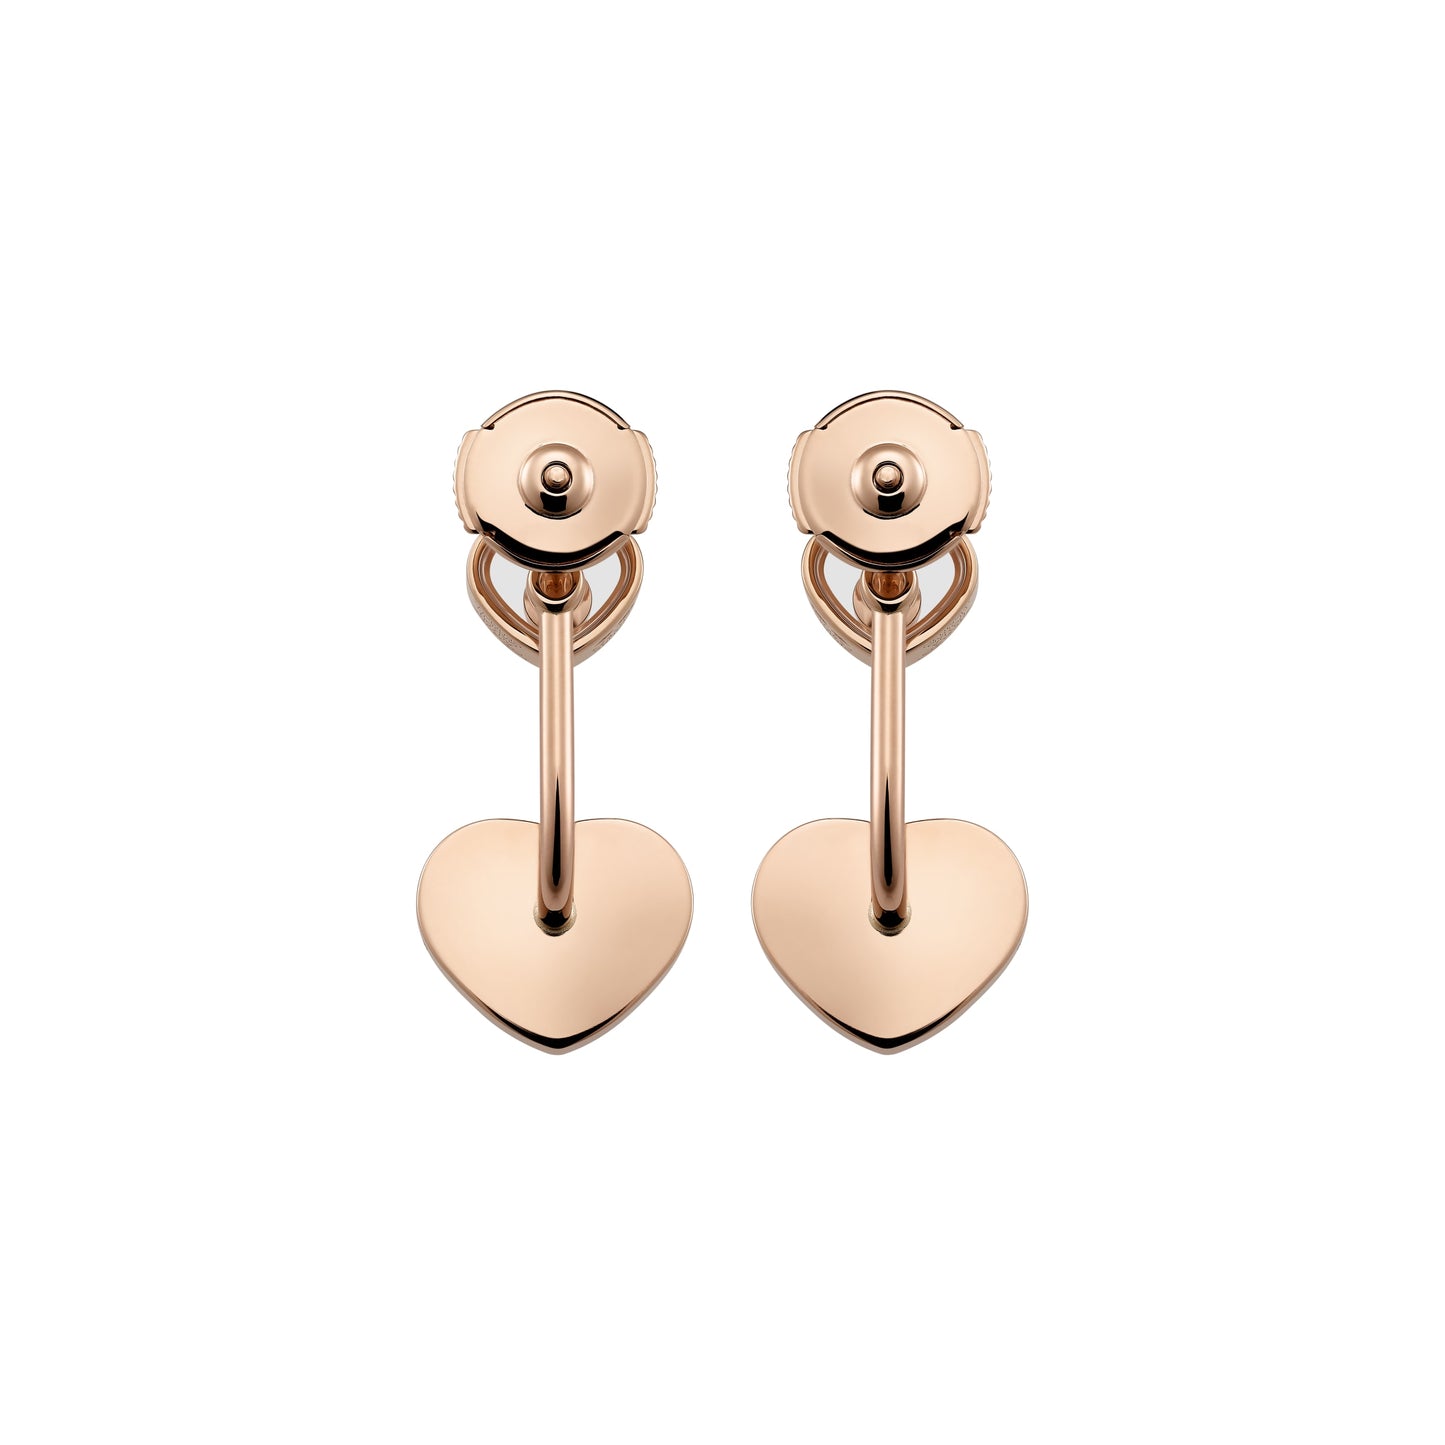 HAPPY HEARTS EARRINGS, ETHICAL ROSE GOLD, DIAMONDS, ONYX 83A082-5201